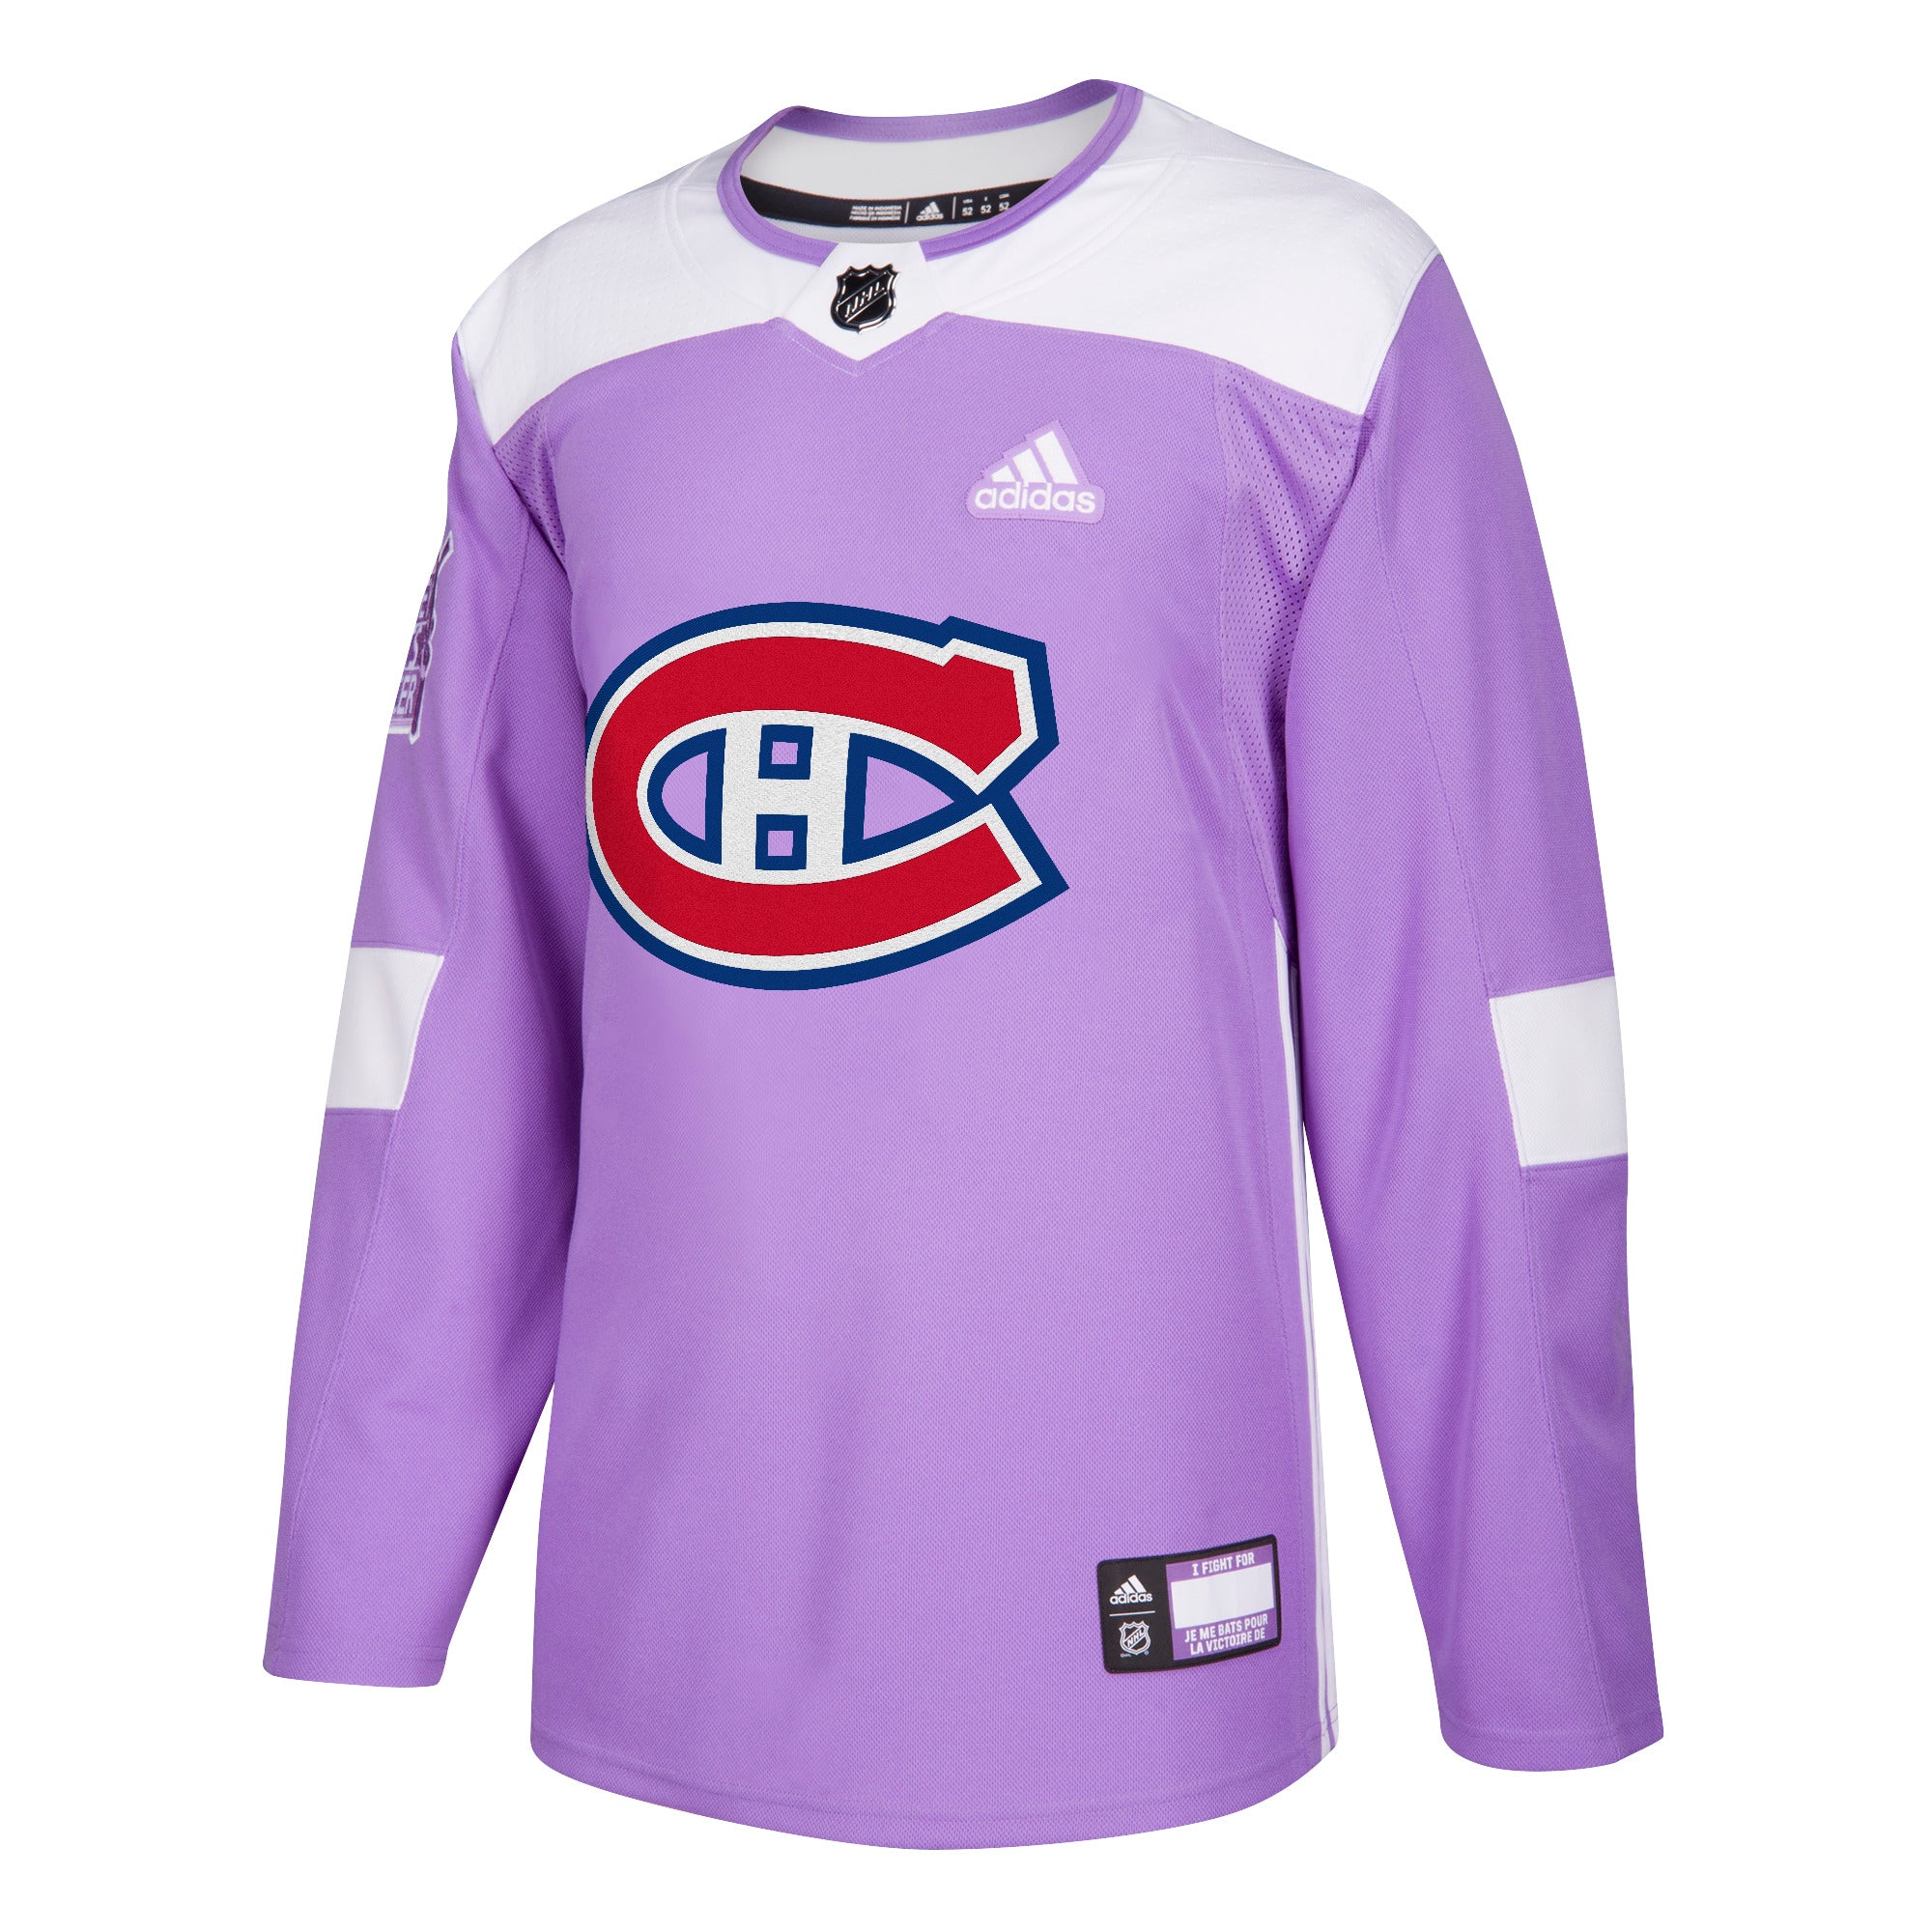 Montreal Canadiens auction LGBTQ Pride jerseys of 32 players